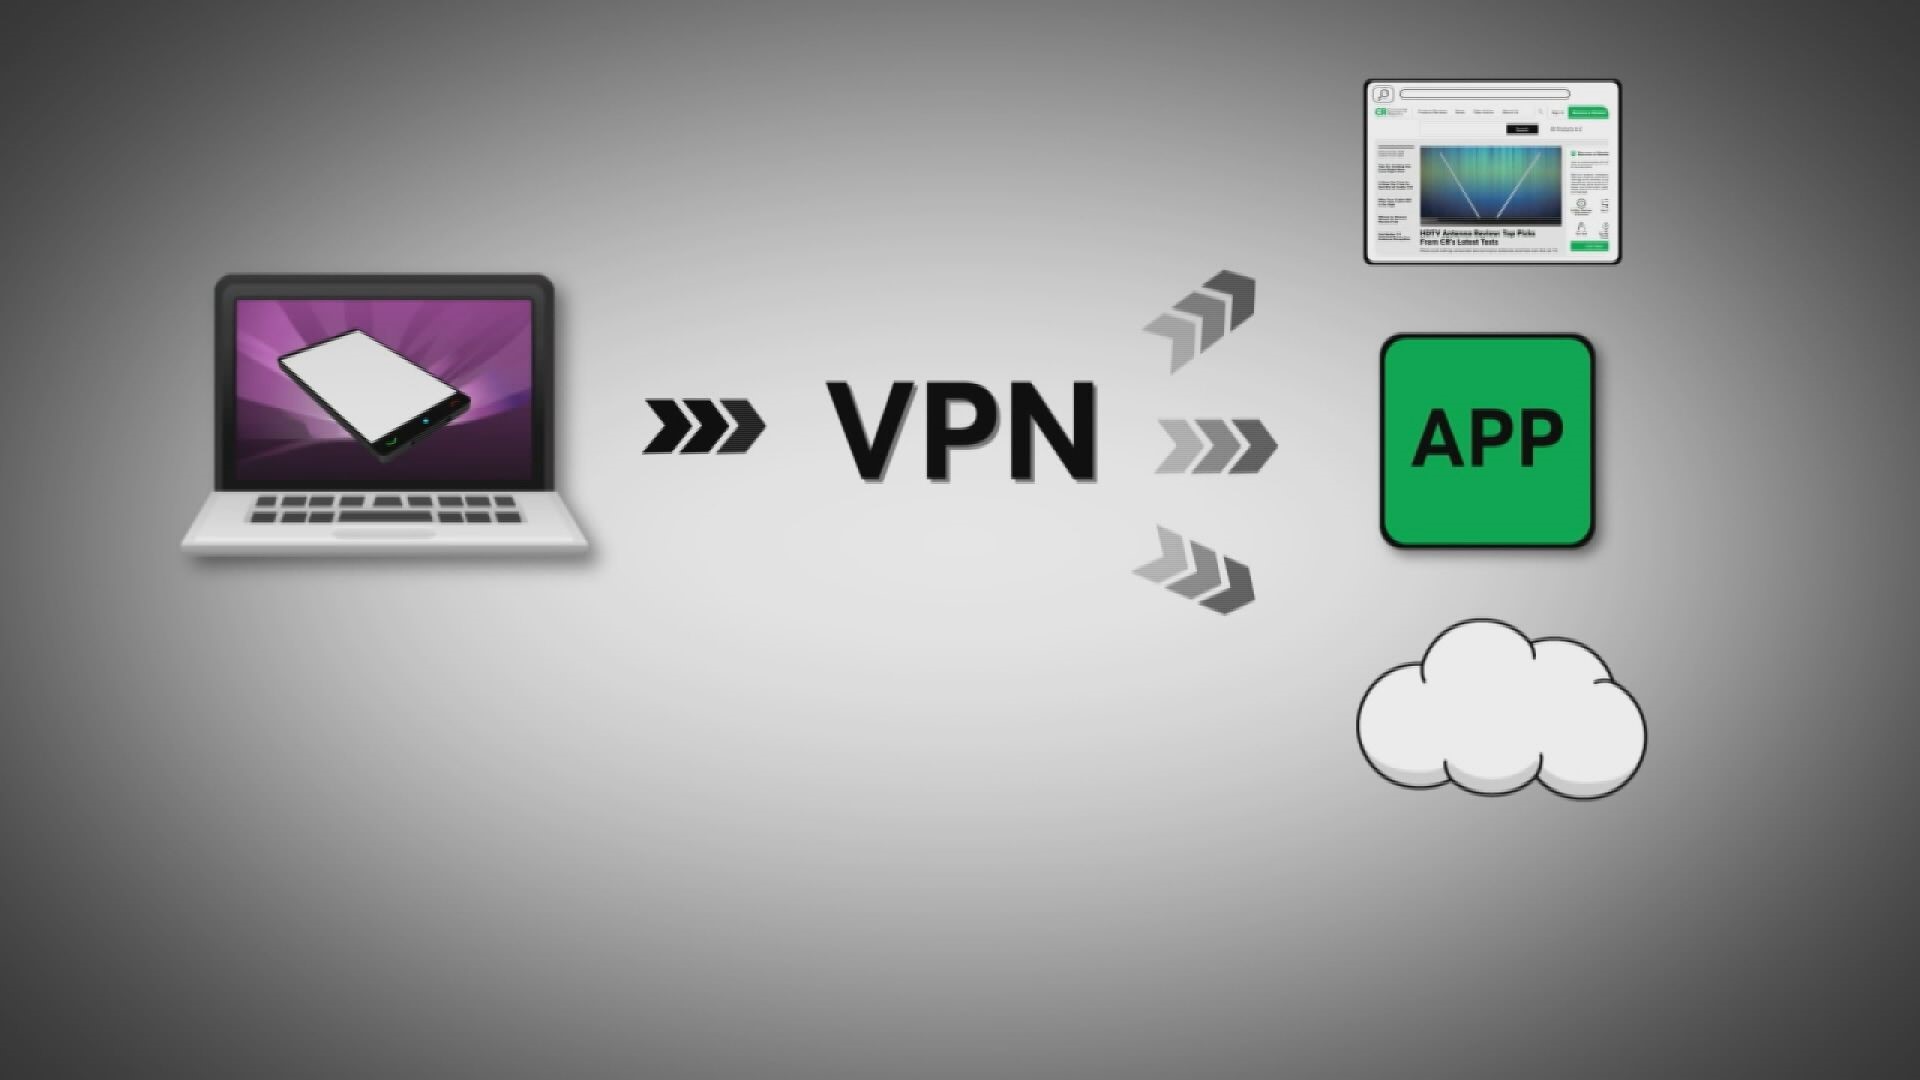 A Virtual Private Network is designed to keep your information private, but a VPN can be used to stop parental controls & restrictions.